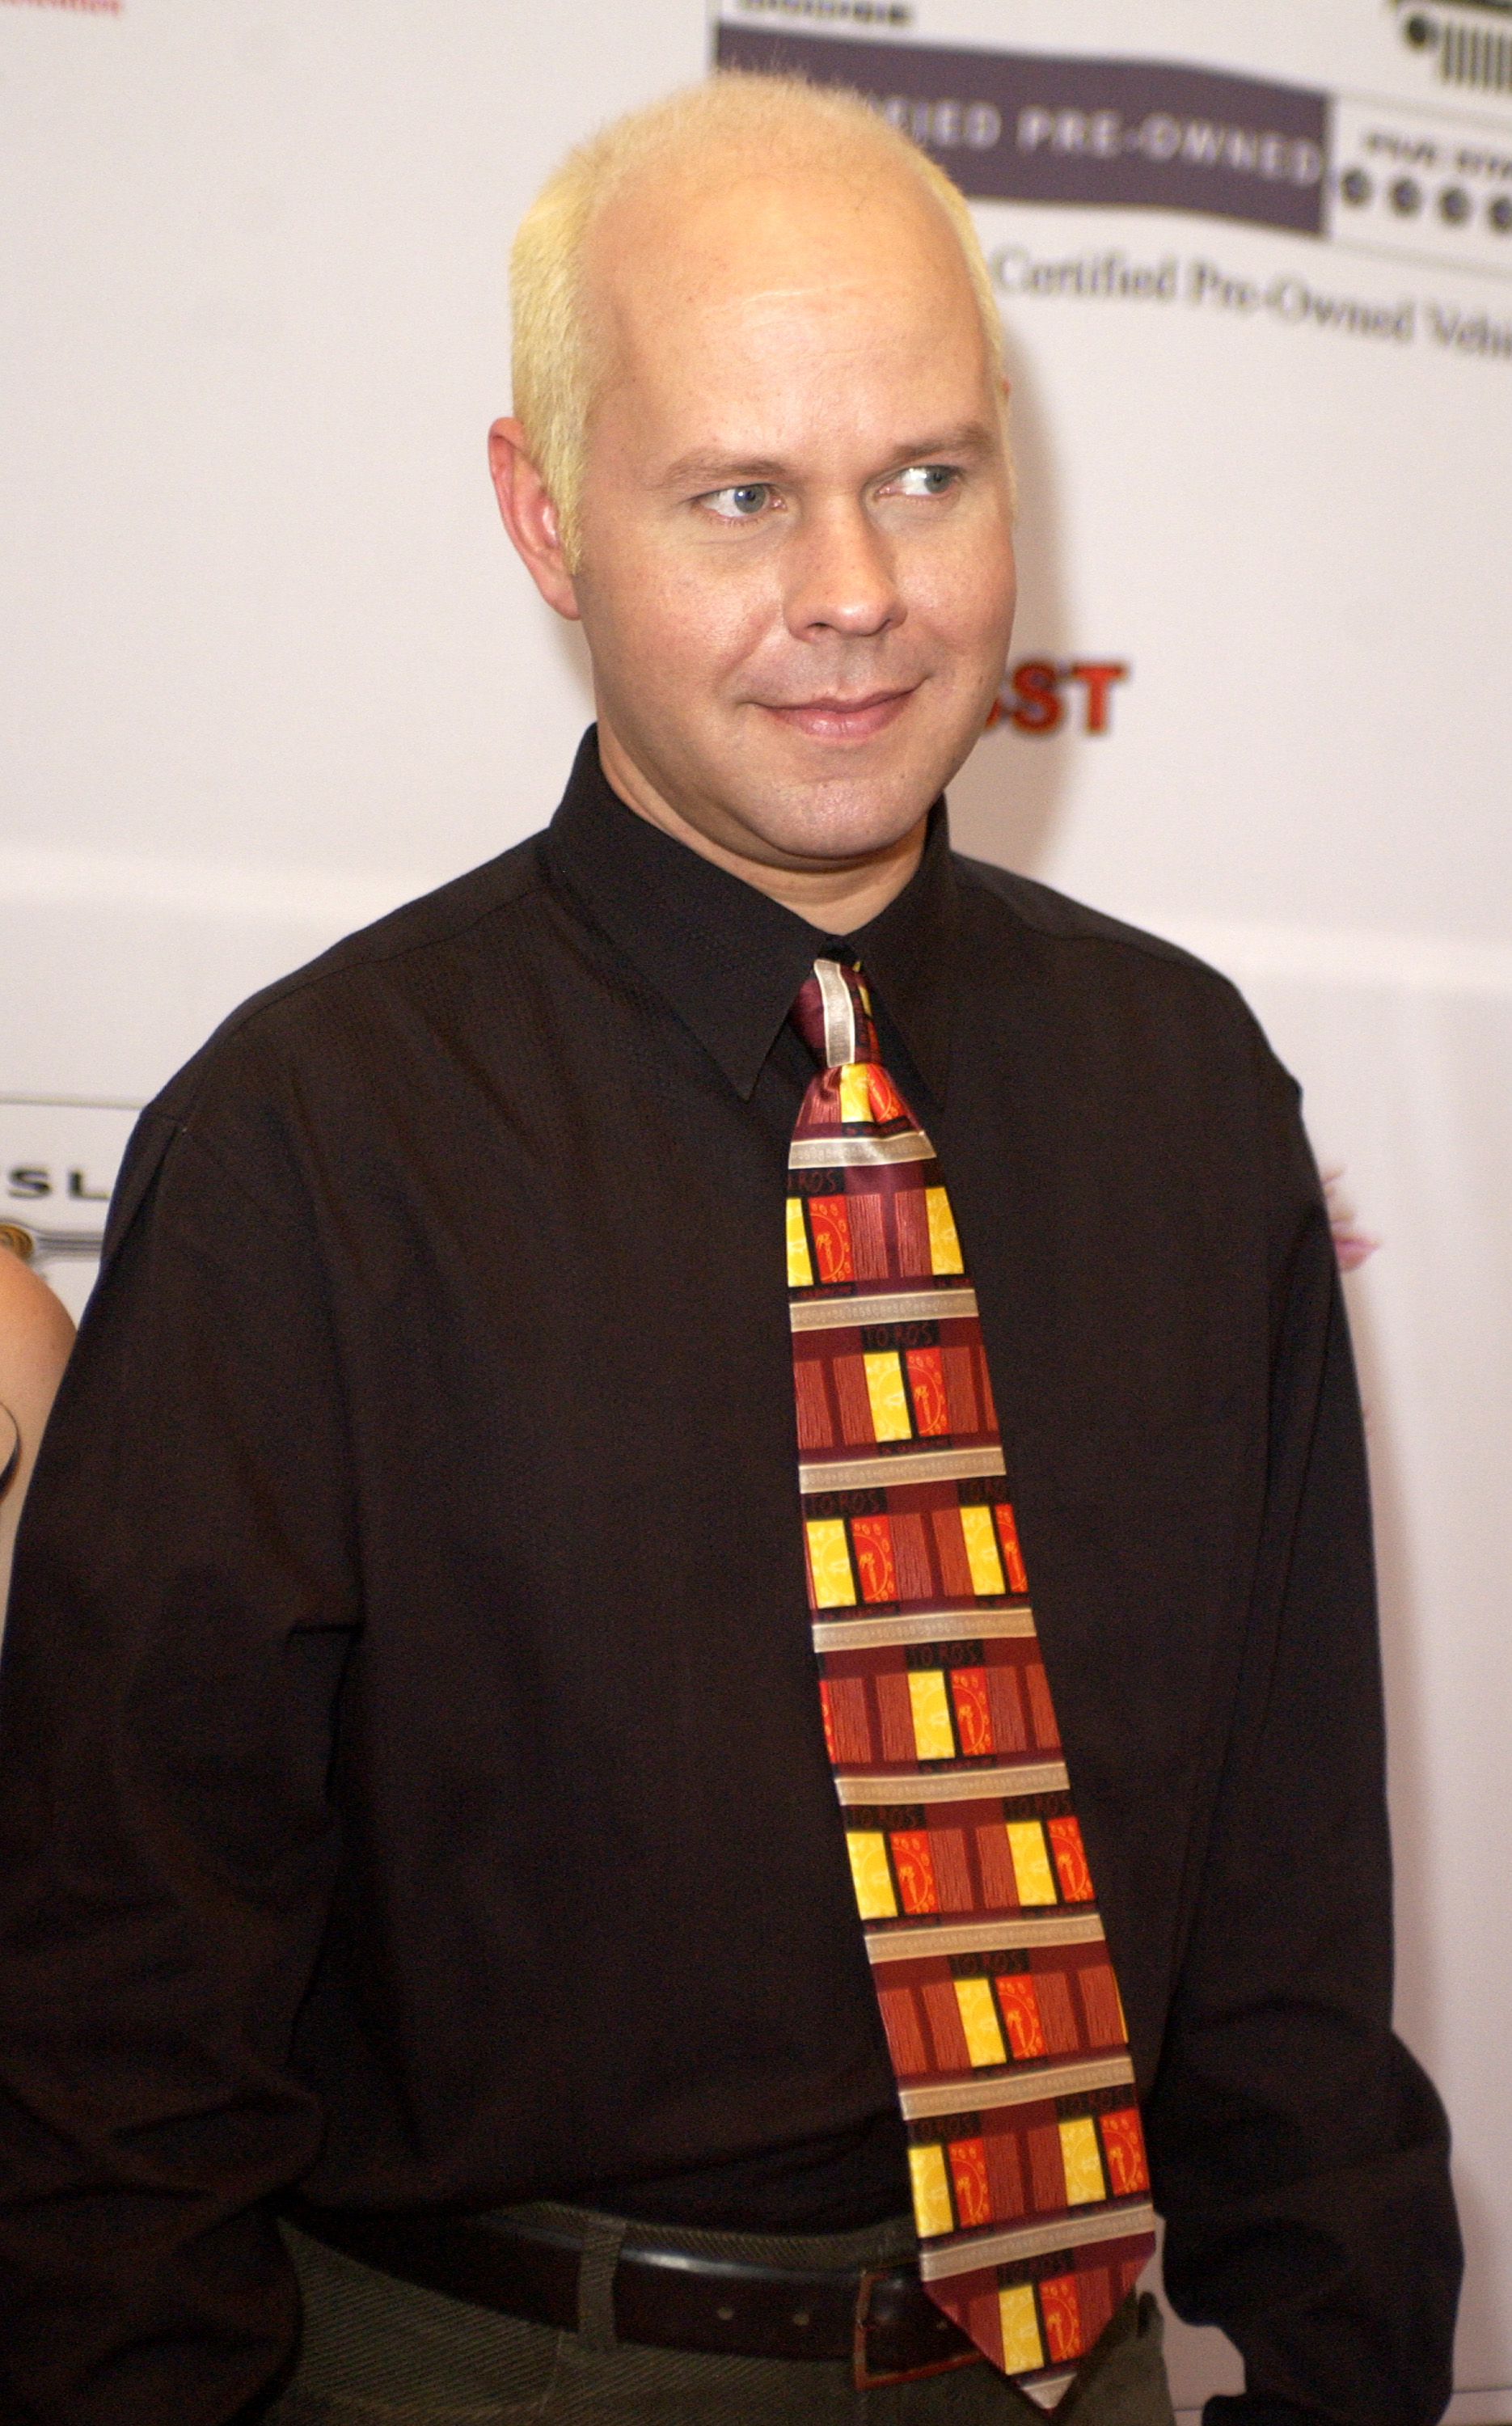 wearing a colorful tie with a dark button-down